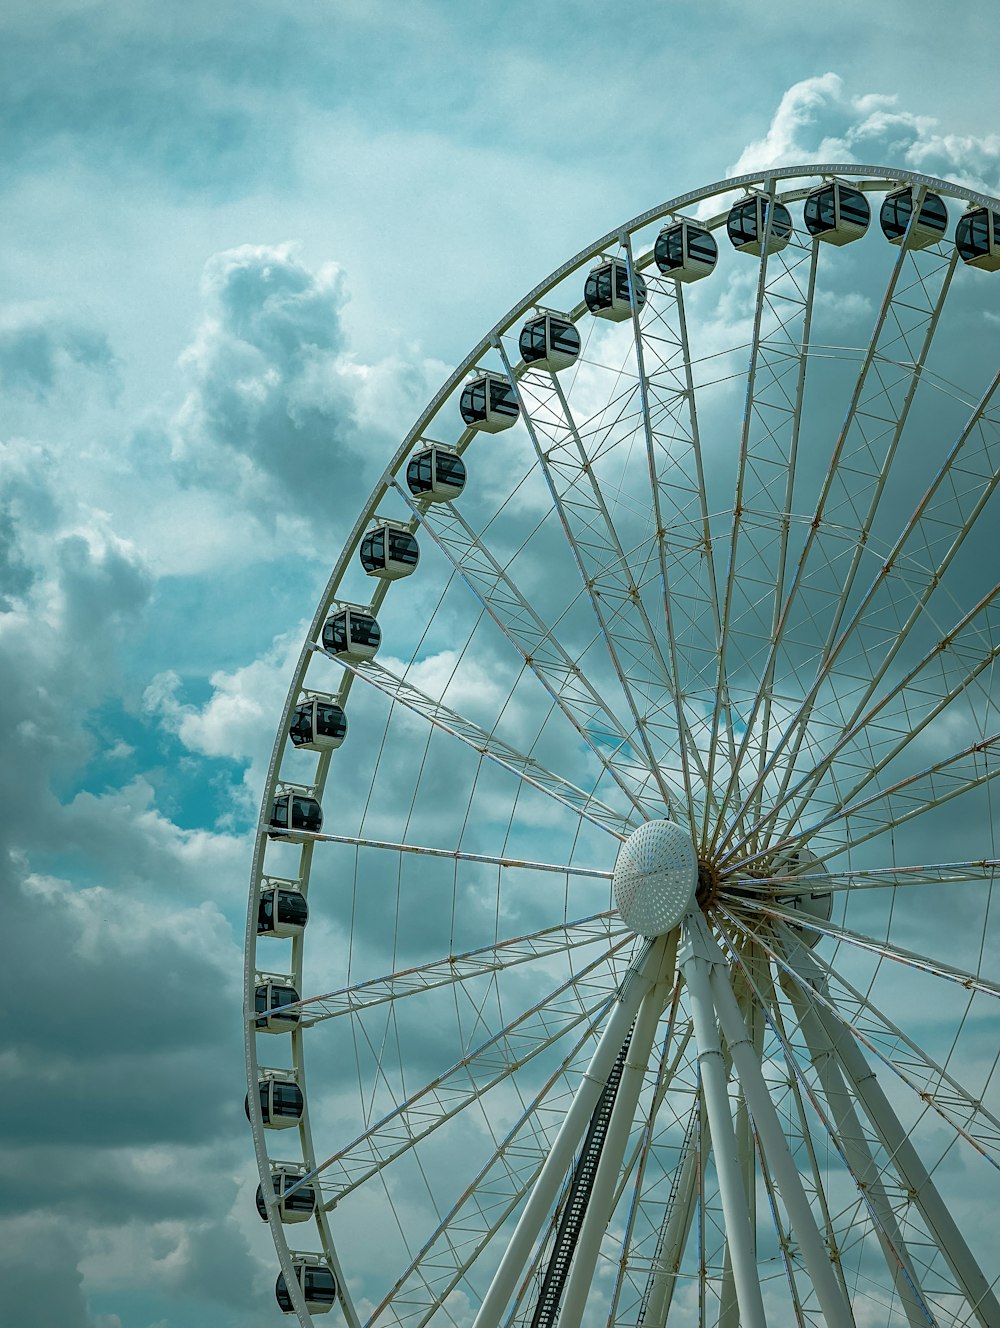 a ferris wheel with clouds in the background